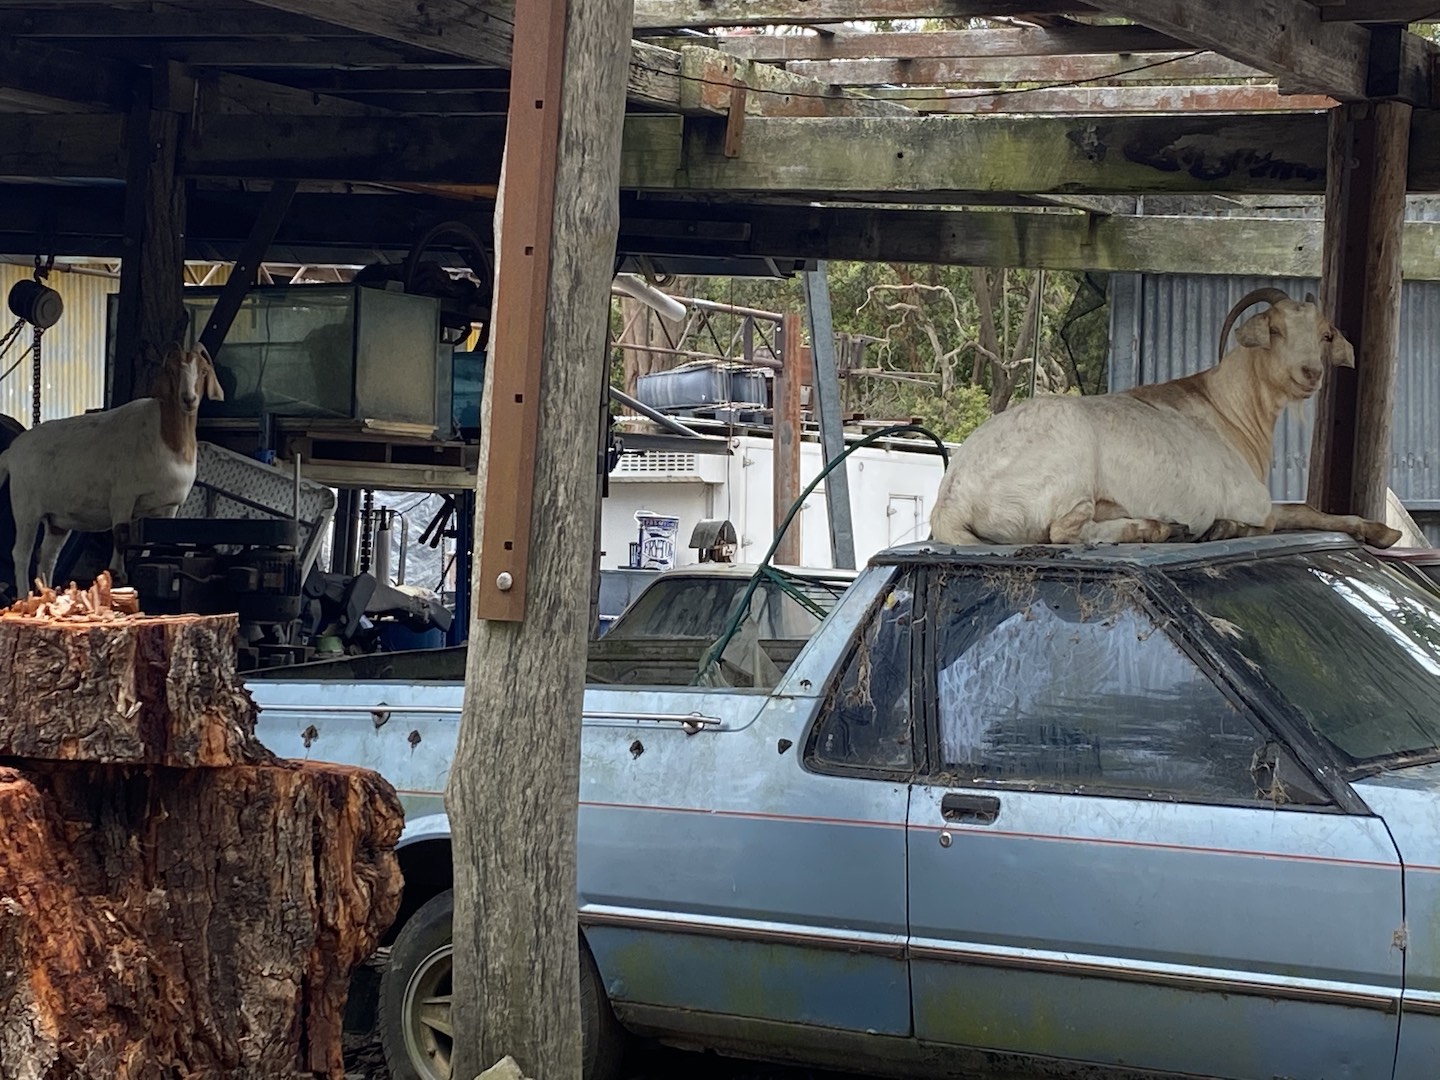 One happy looking goat, sitting on a ute